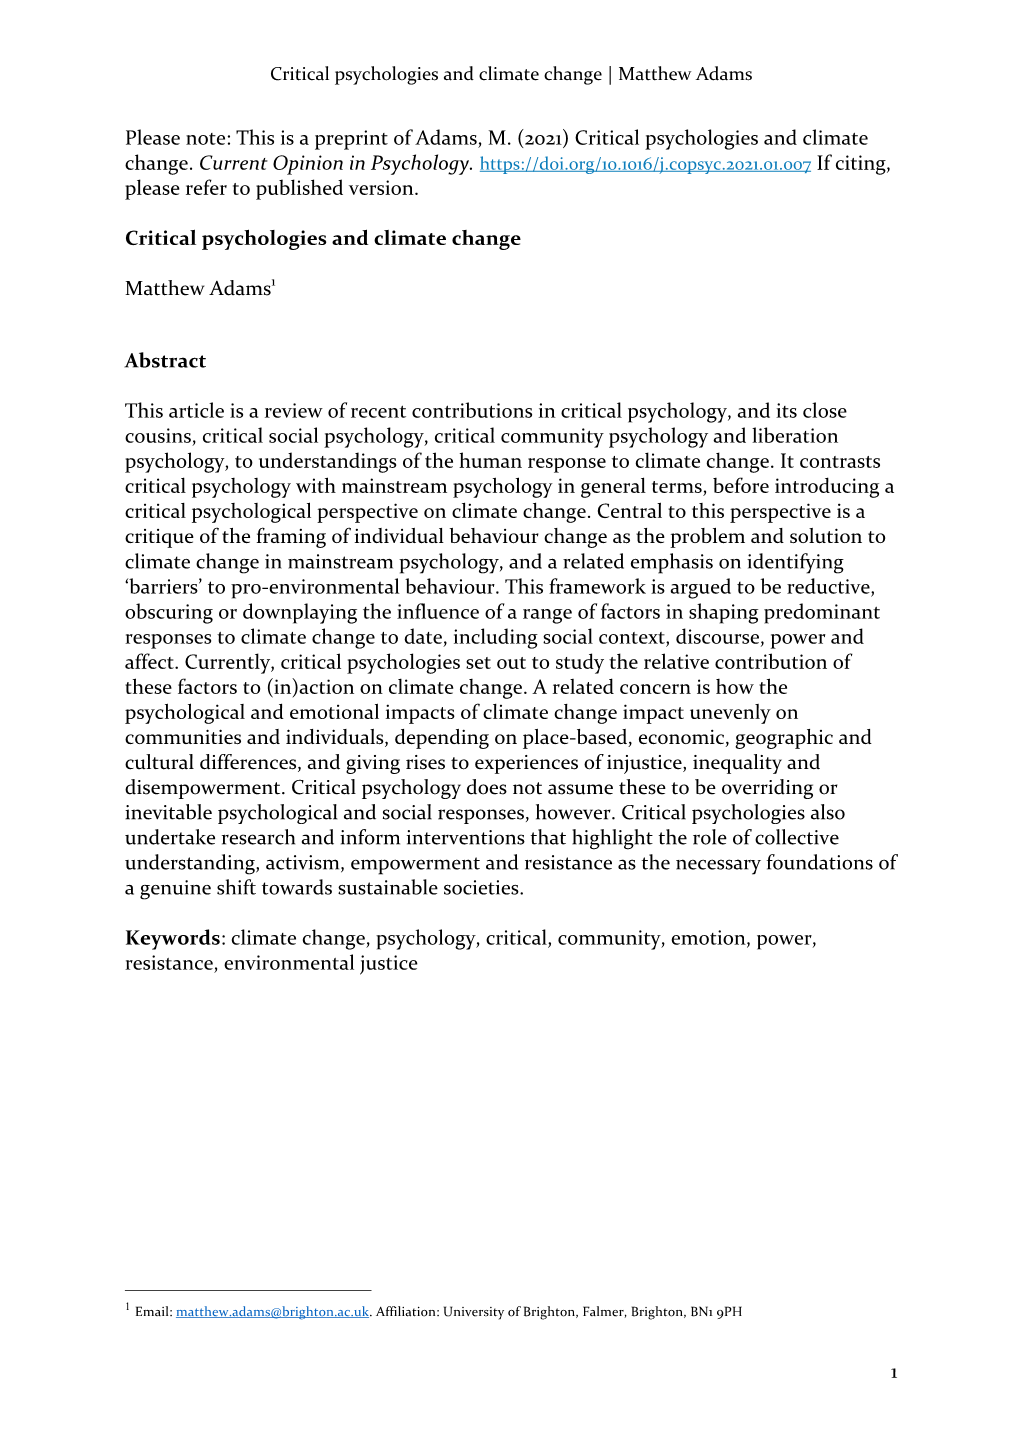 This Is a Preprint of Adams, M. (2021) Critical Psychologies and Climate Change